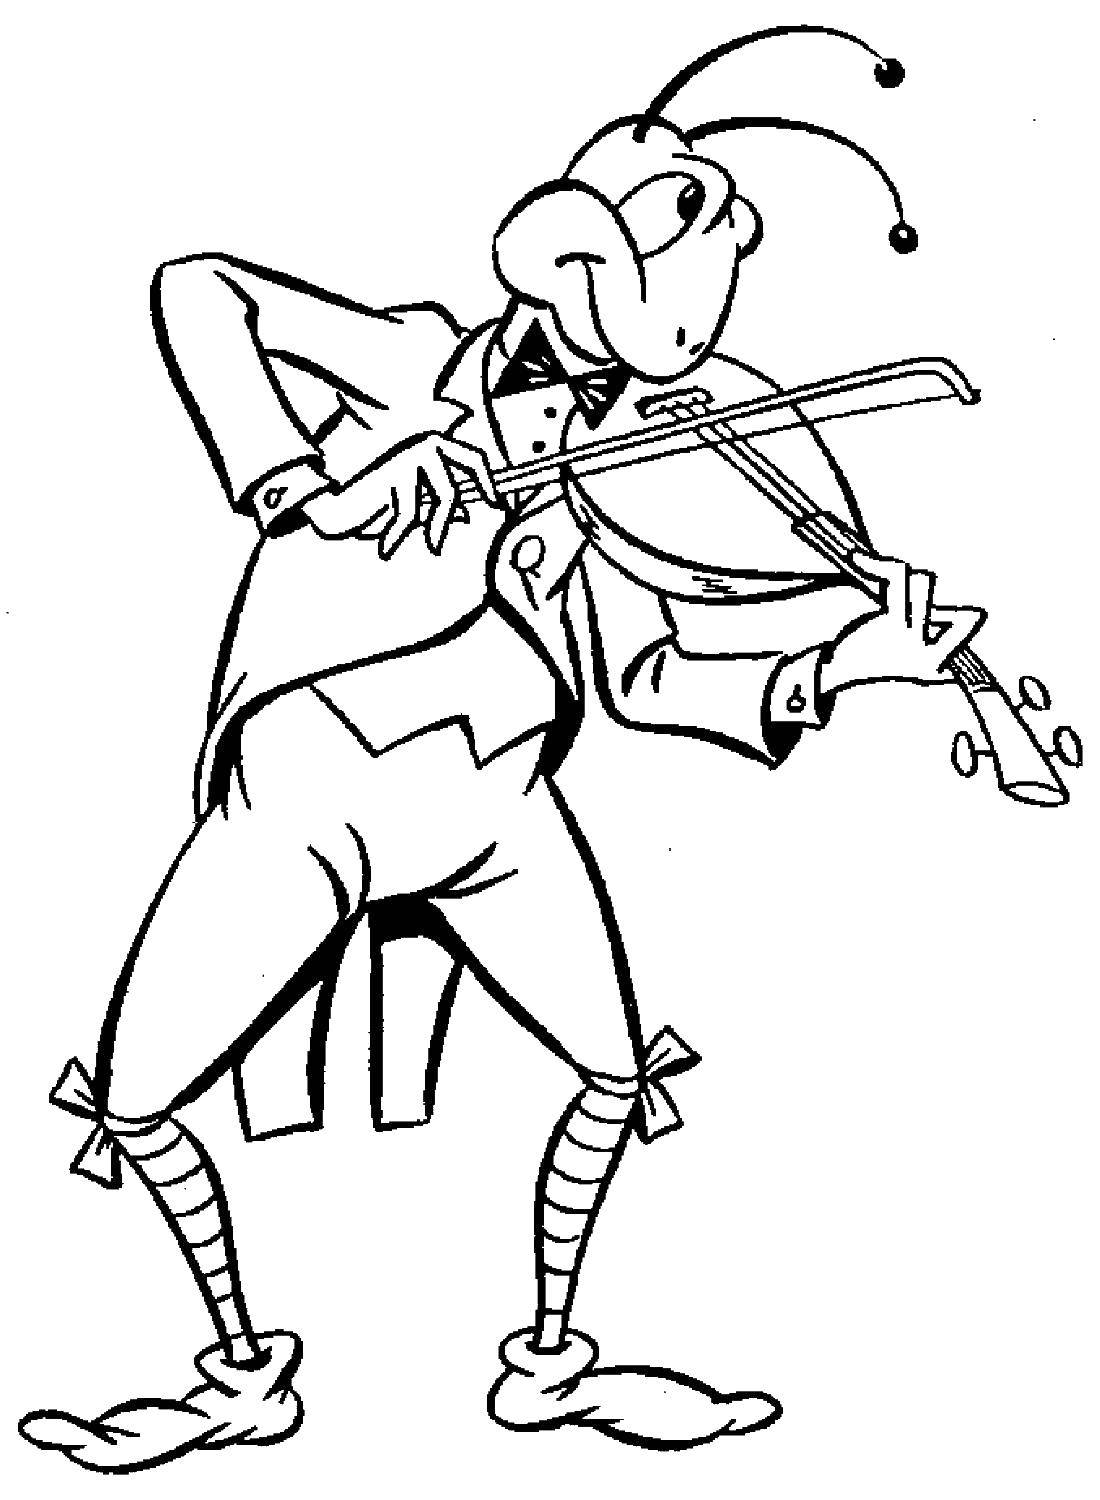 Coloring Grasshopper with a violin. Category Insects. Tags:  grasshopper, insects, violin.